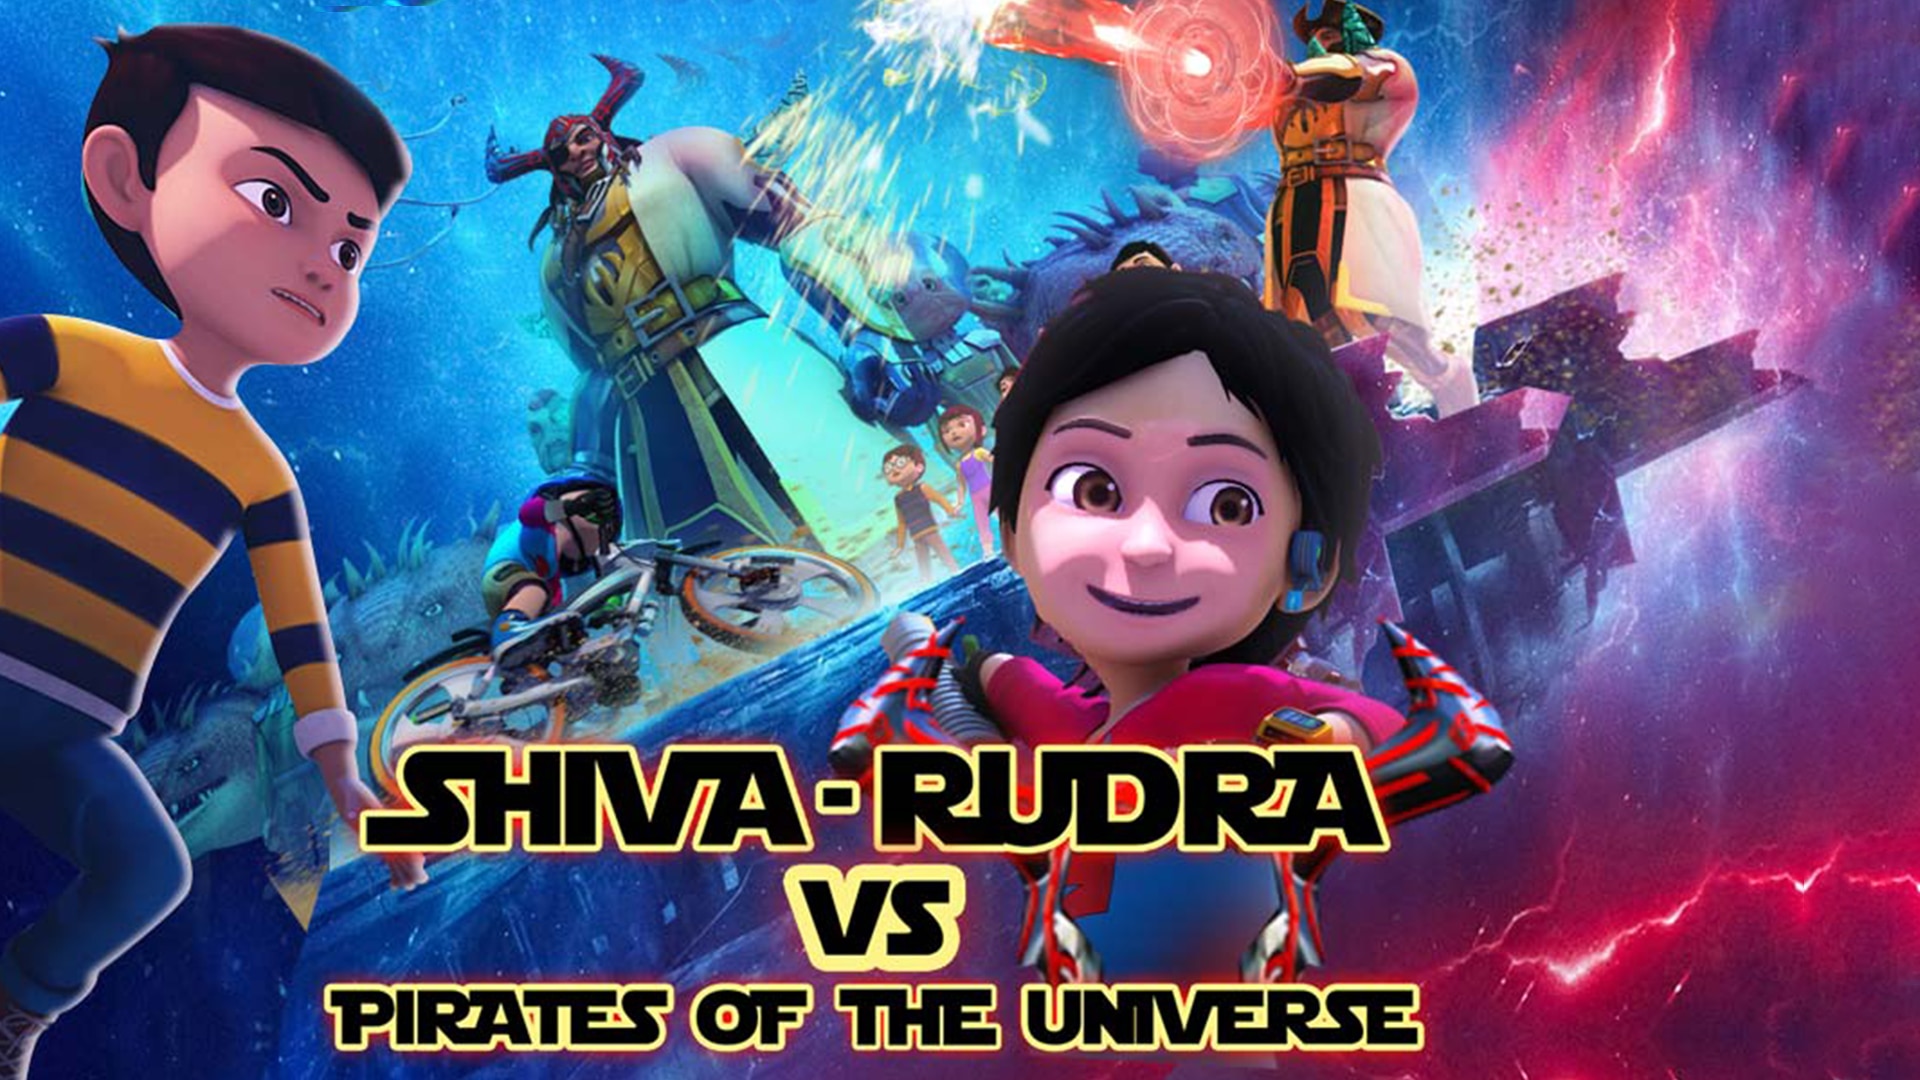 Shiva - Rudra Vs The Pirates Of The Universe | Watch Full HD Hindi Movie  Shiva - Rudra Vs The Pirates Of The Universe 2022 Online